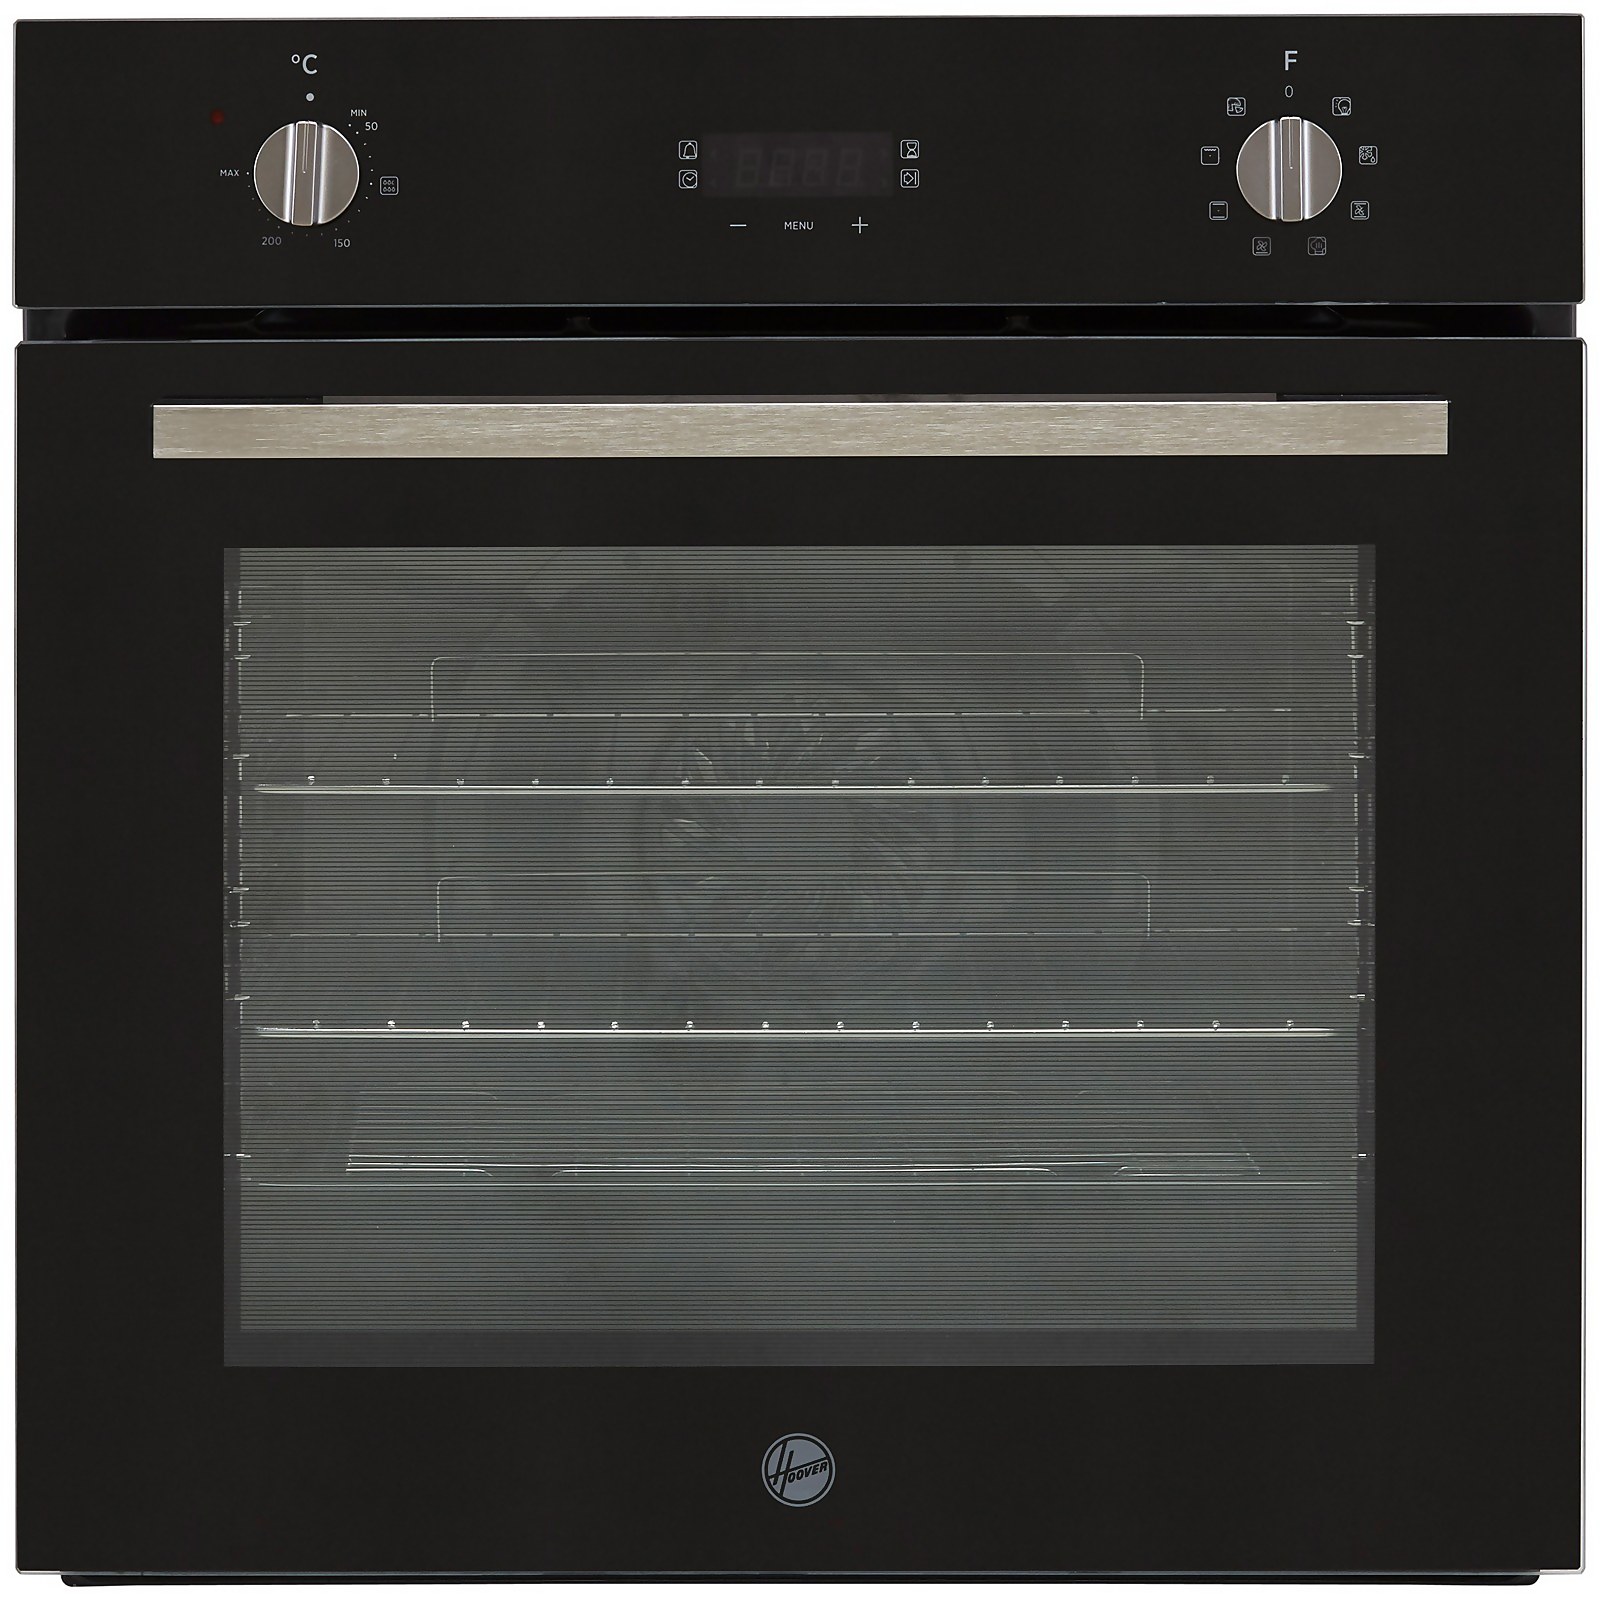 Photo of Hoover H-oven 300 Hoc3ub3158bi Built In Electric Single Oven - Black